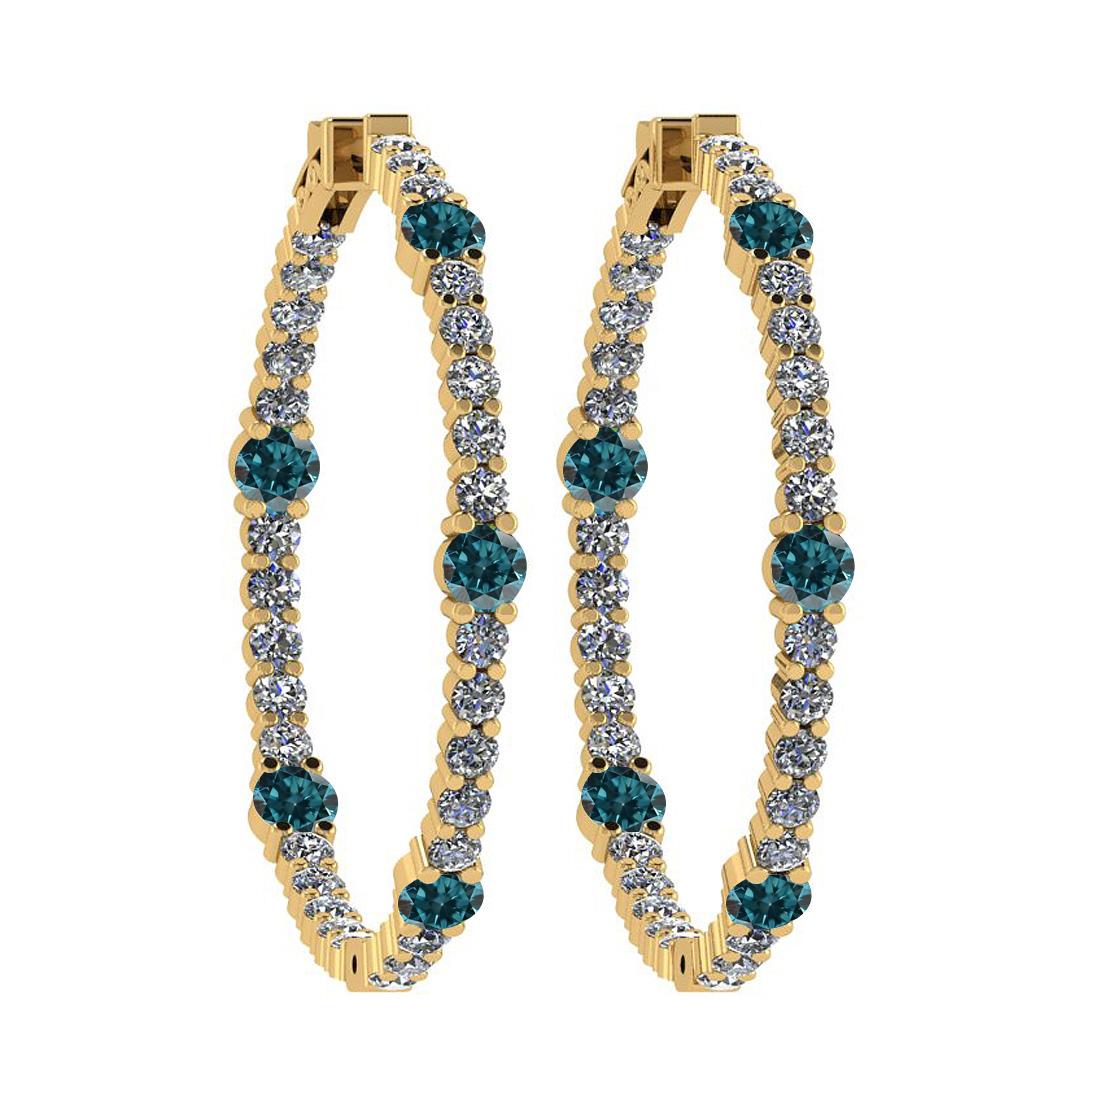 2.08 Ctw i2/i3 Treated Fancy Blue and White Diamond 14K Yellow Gold Hoop Earrings